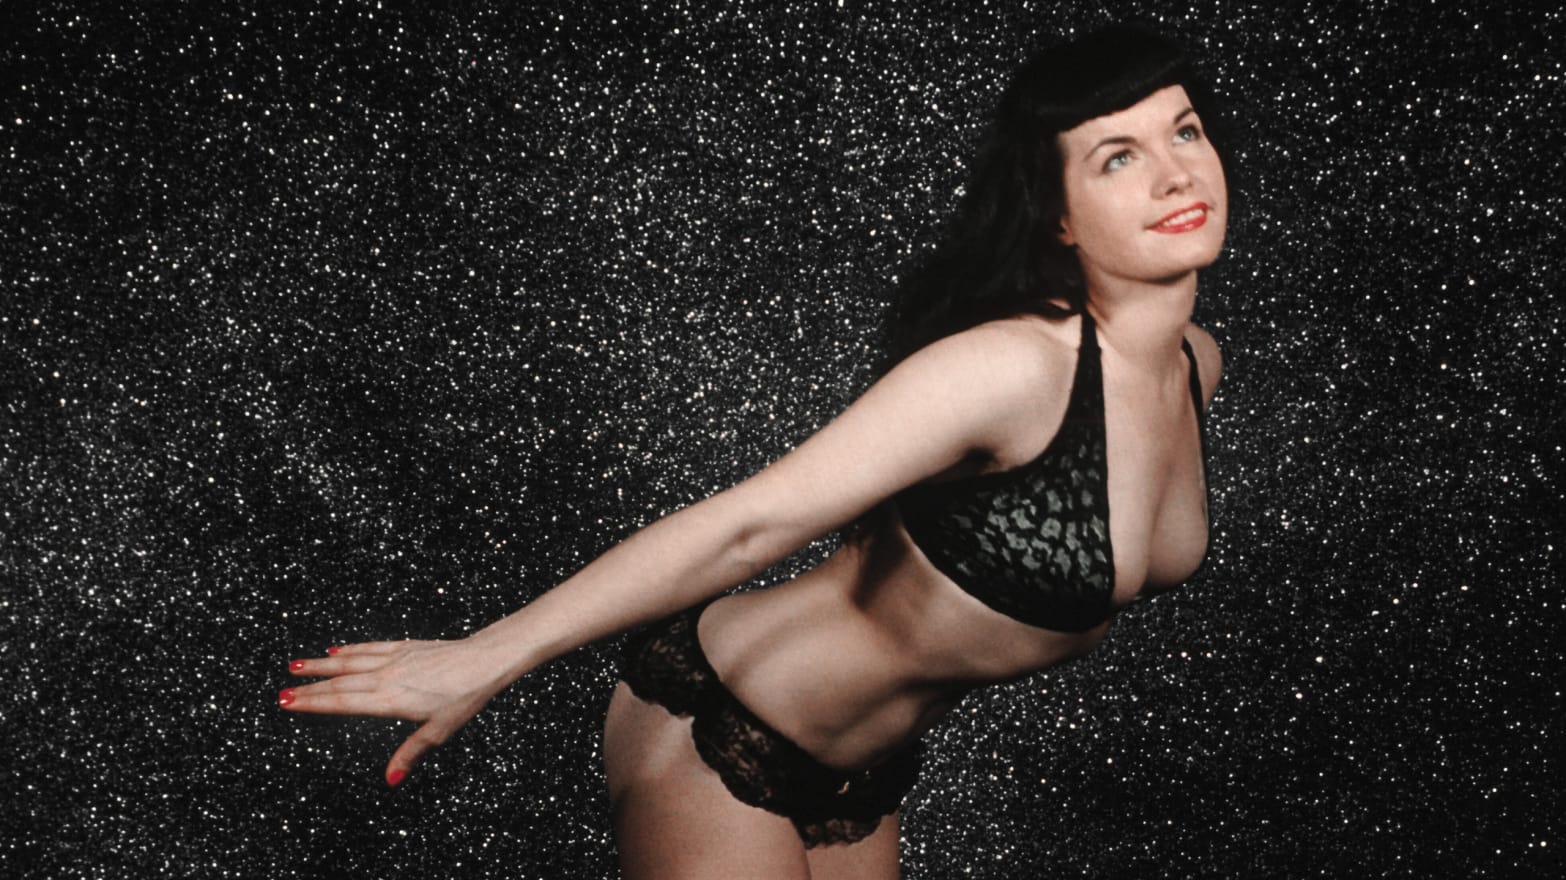 Cheese reccomend Betty page bdsm